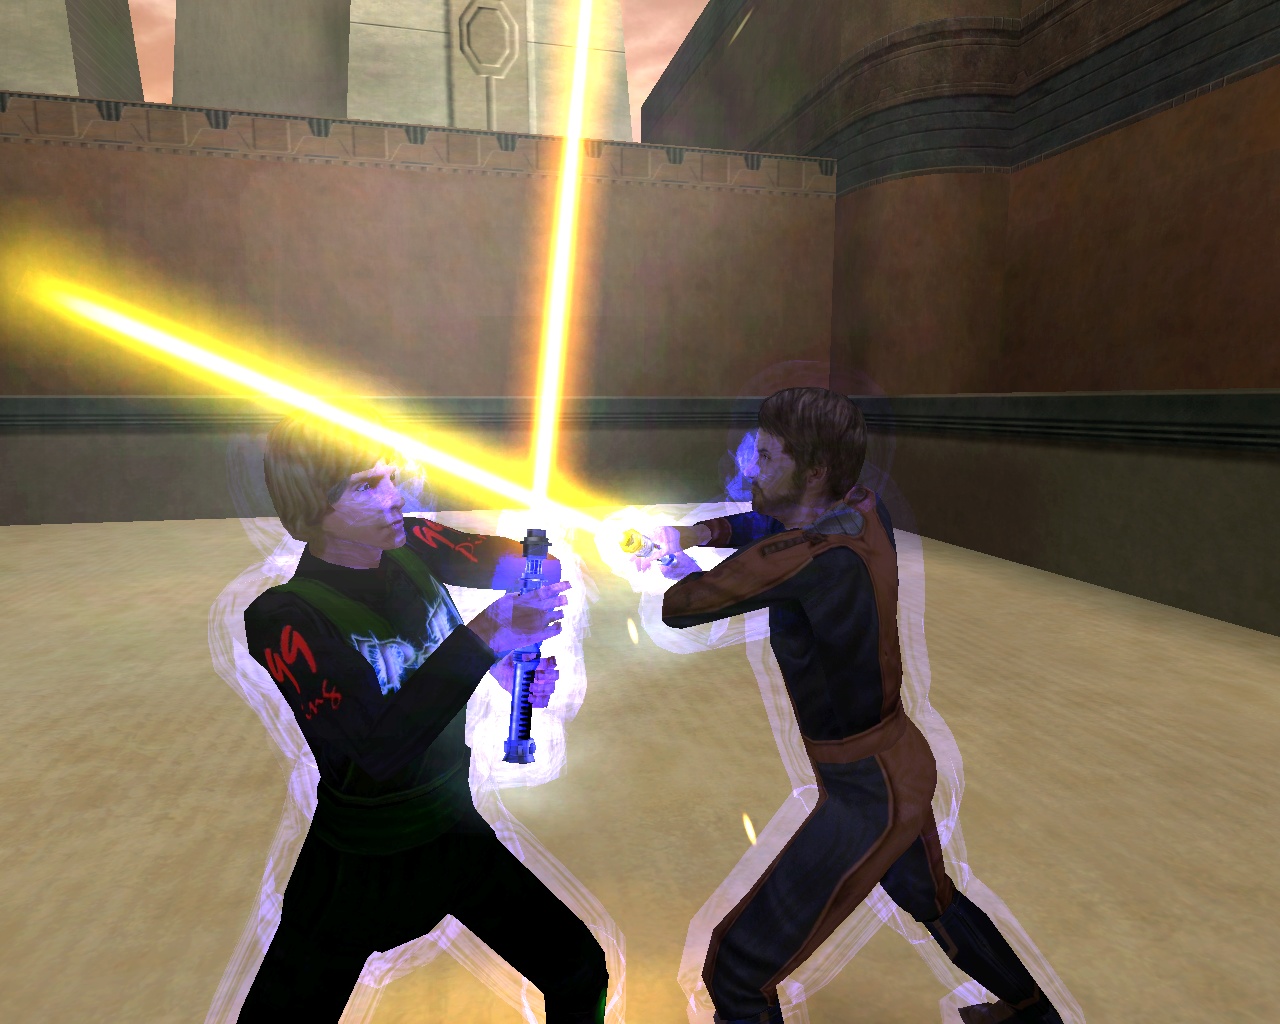 An in-game screenshot of two players in the middle of a lightsaber duel.